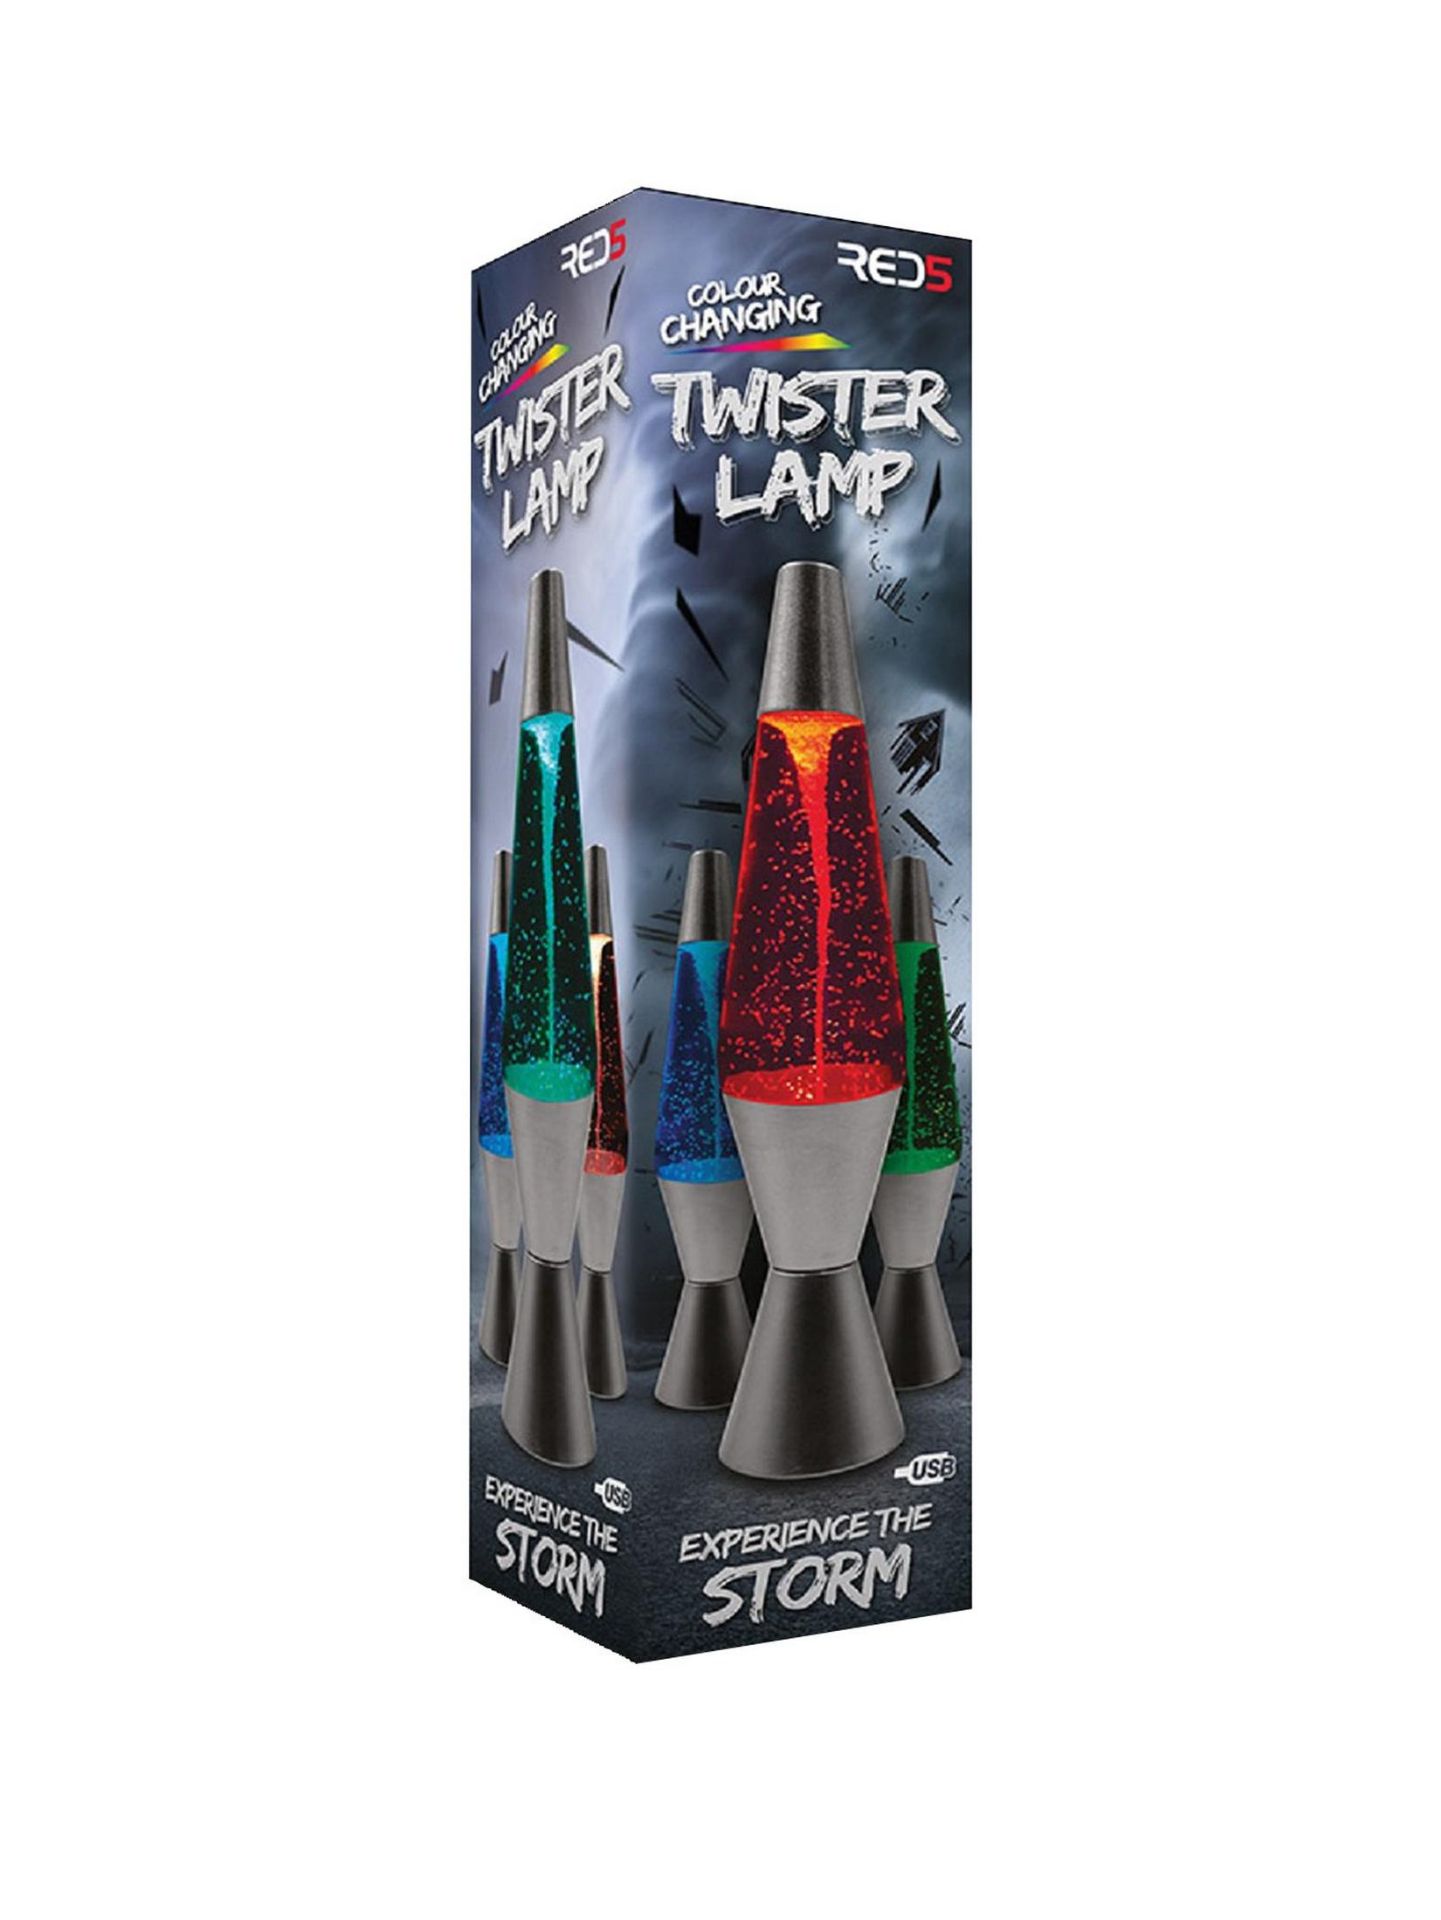 Title: (89/P) 10x Red5 Colour Changing Twister Lamp RRP £20 Each (All Units Have Return To